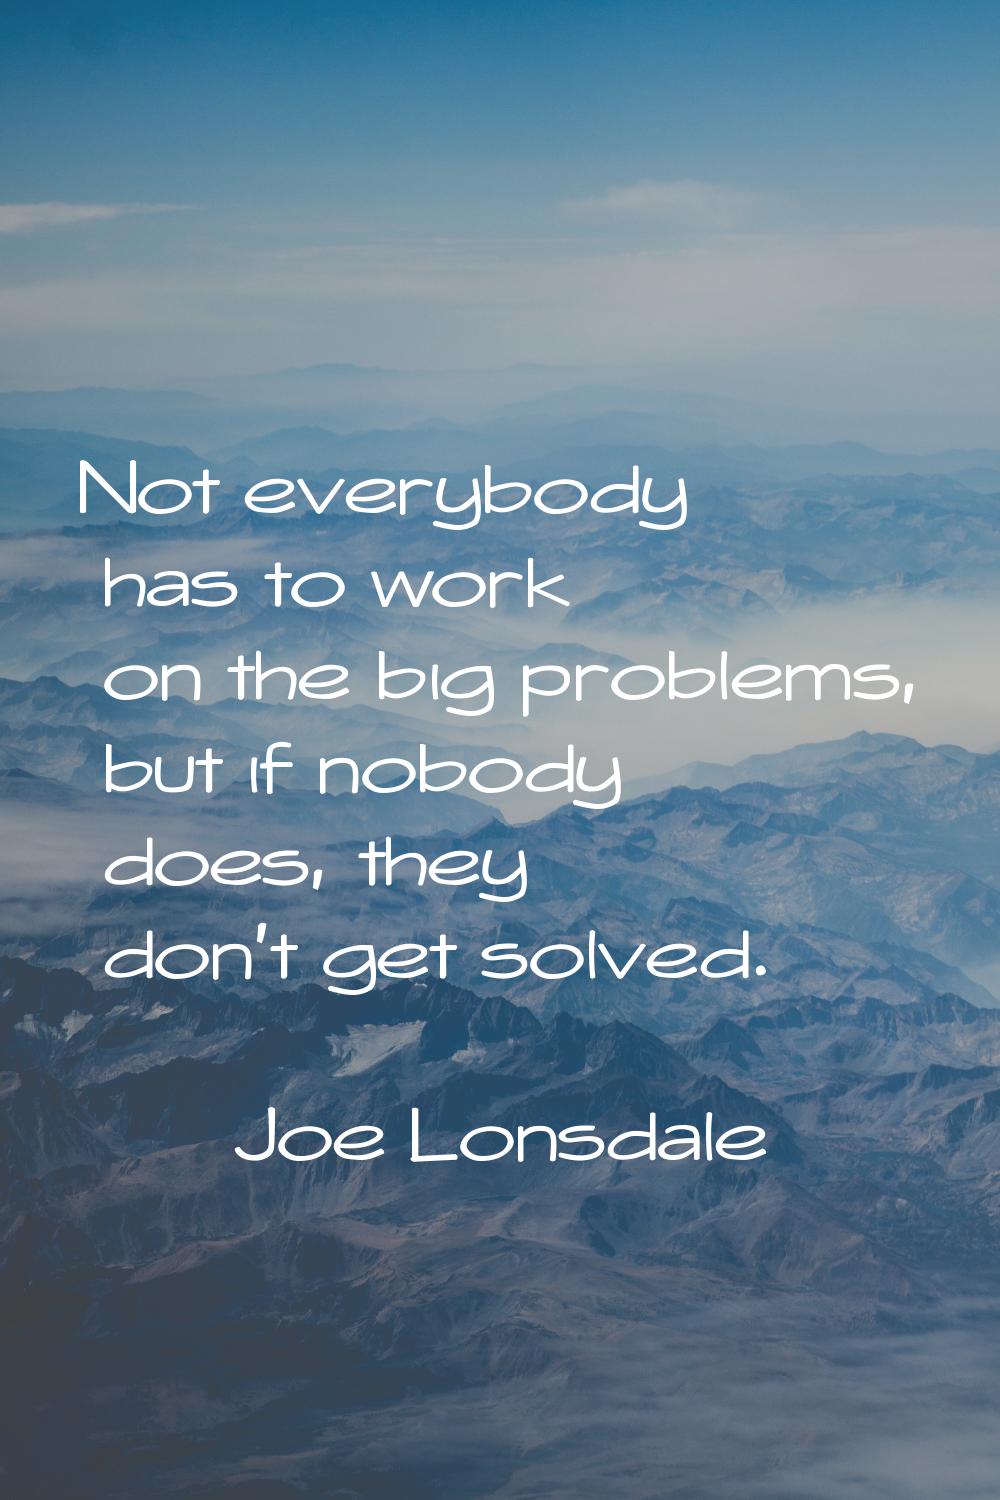 Not everybody has to work on the big problems, but if nobody does, they don't get solved.